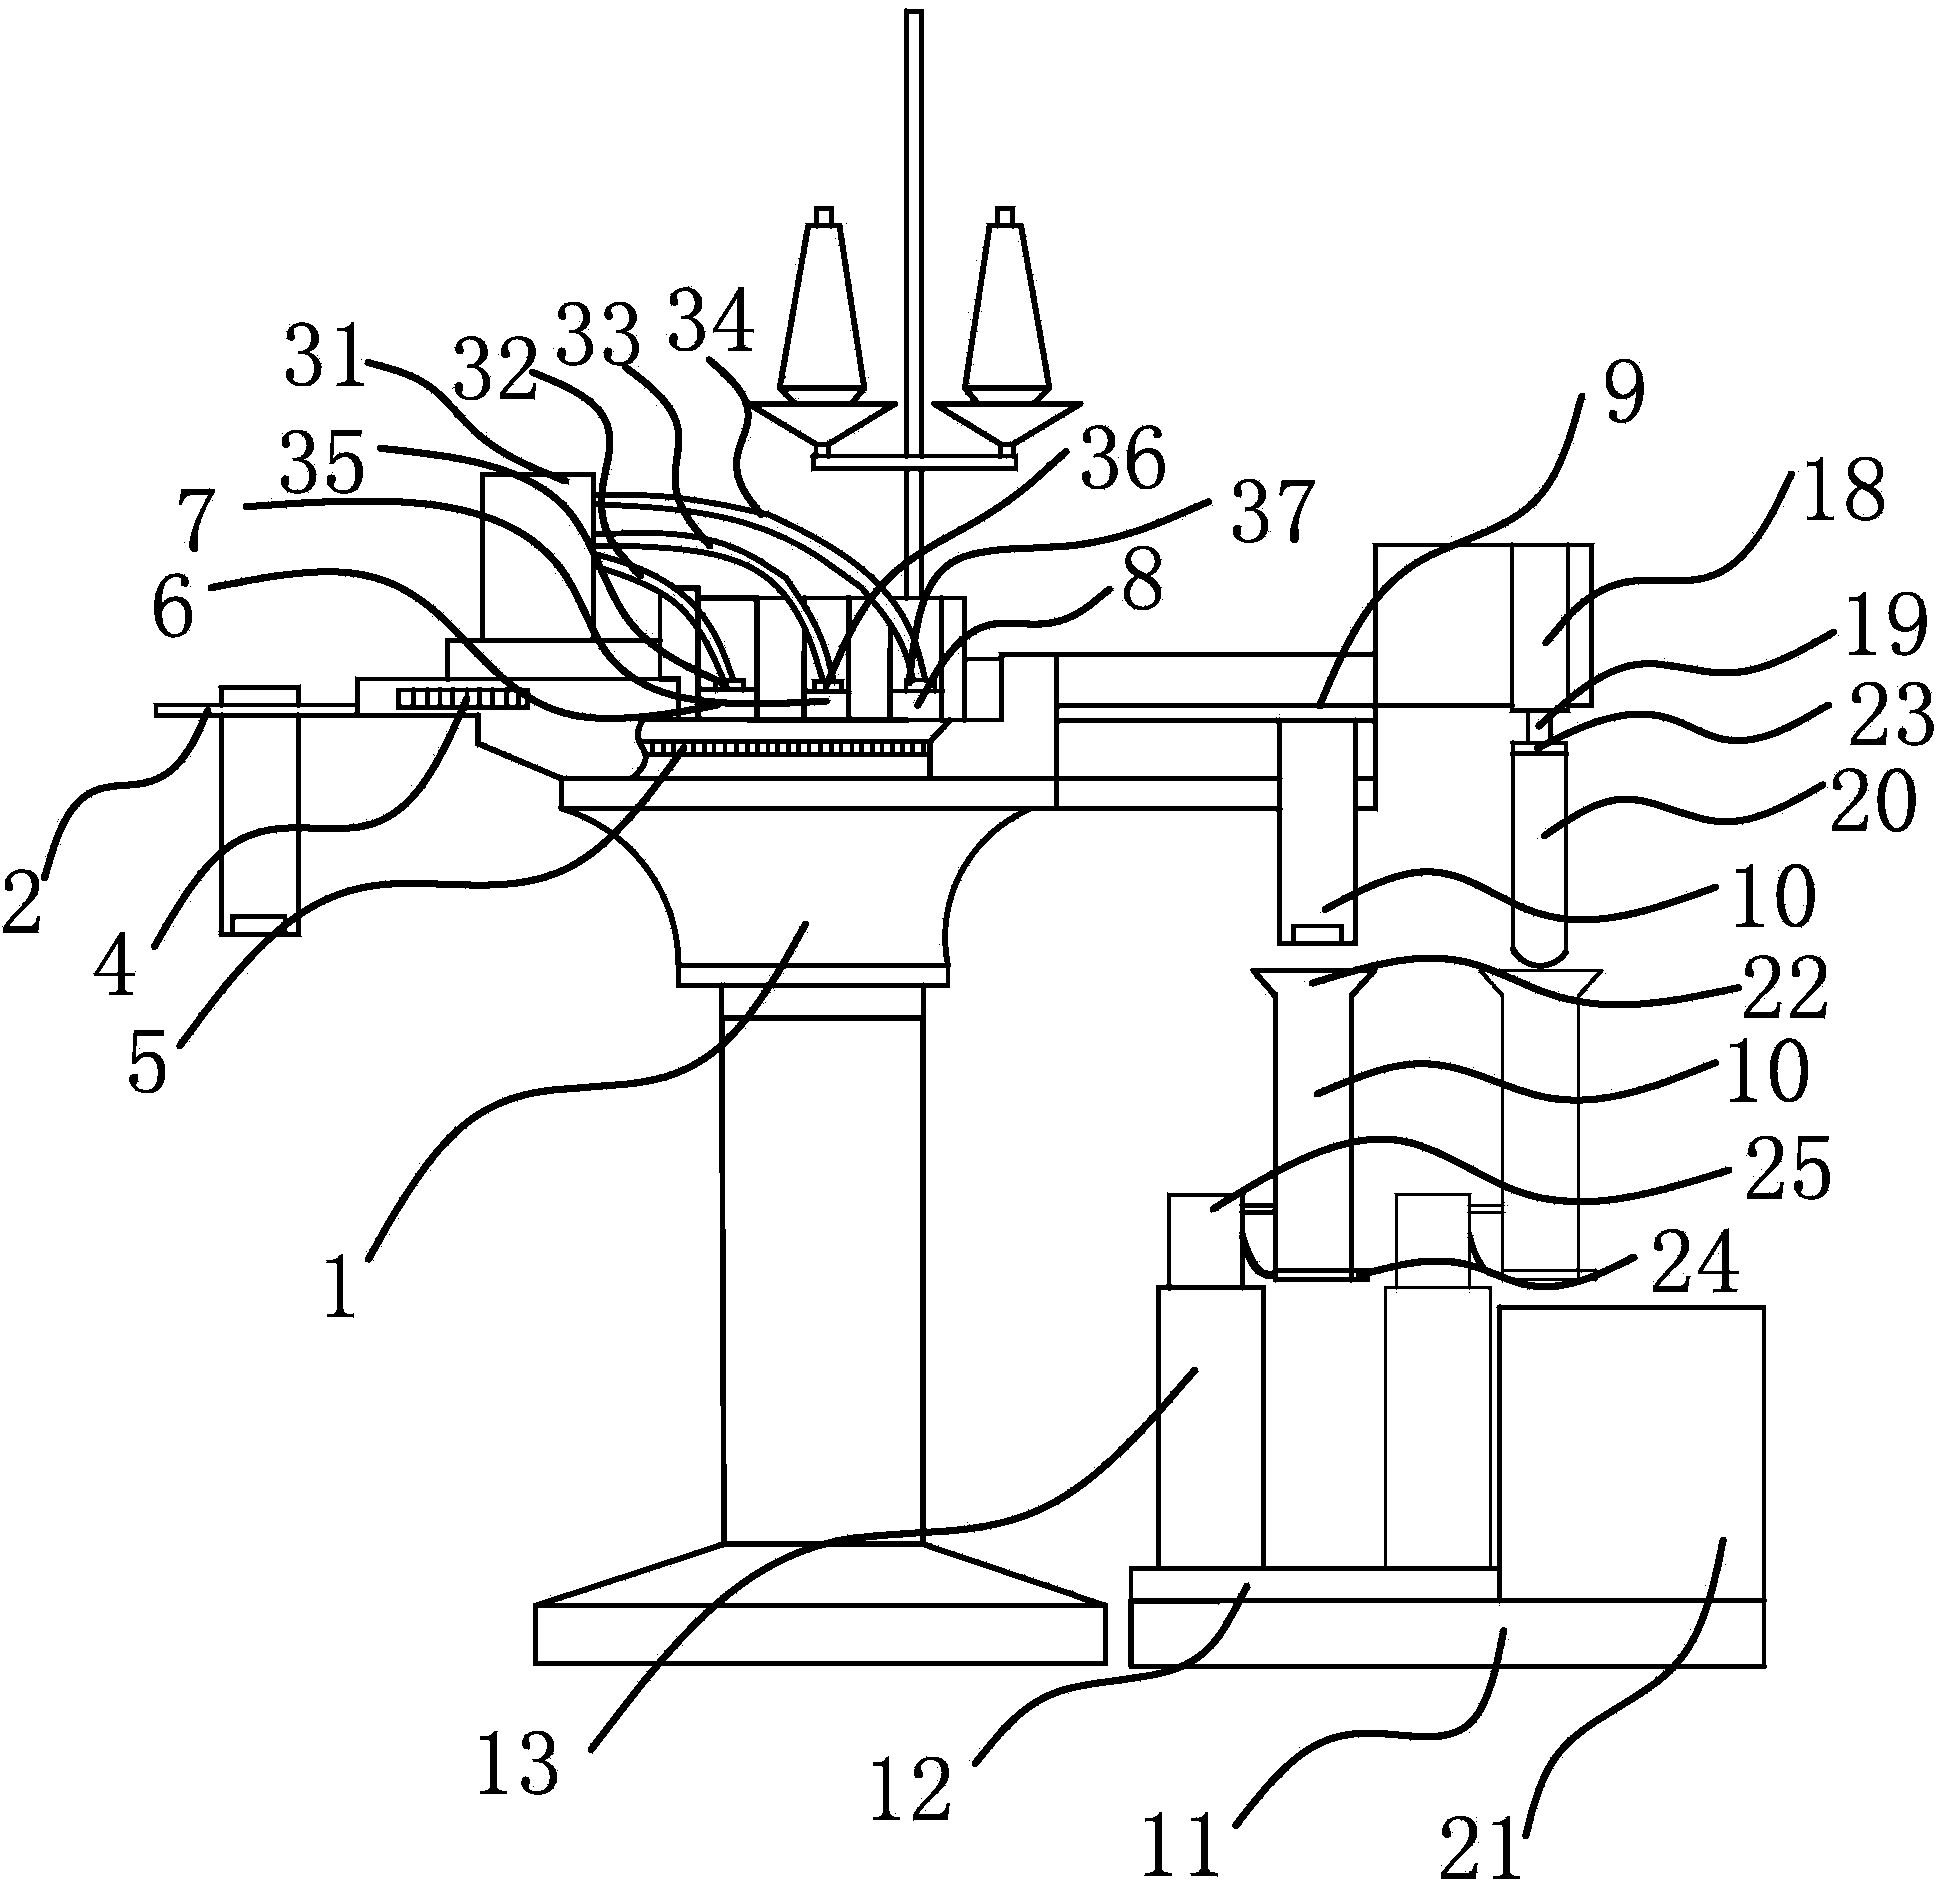 Sock head sewing device with air power source